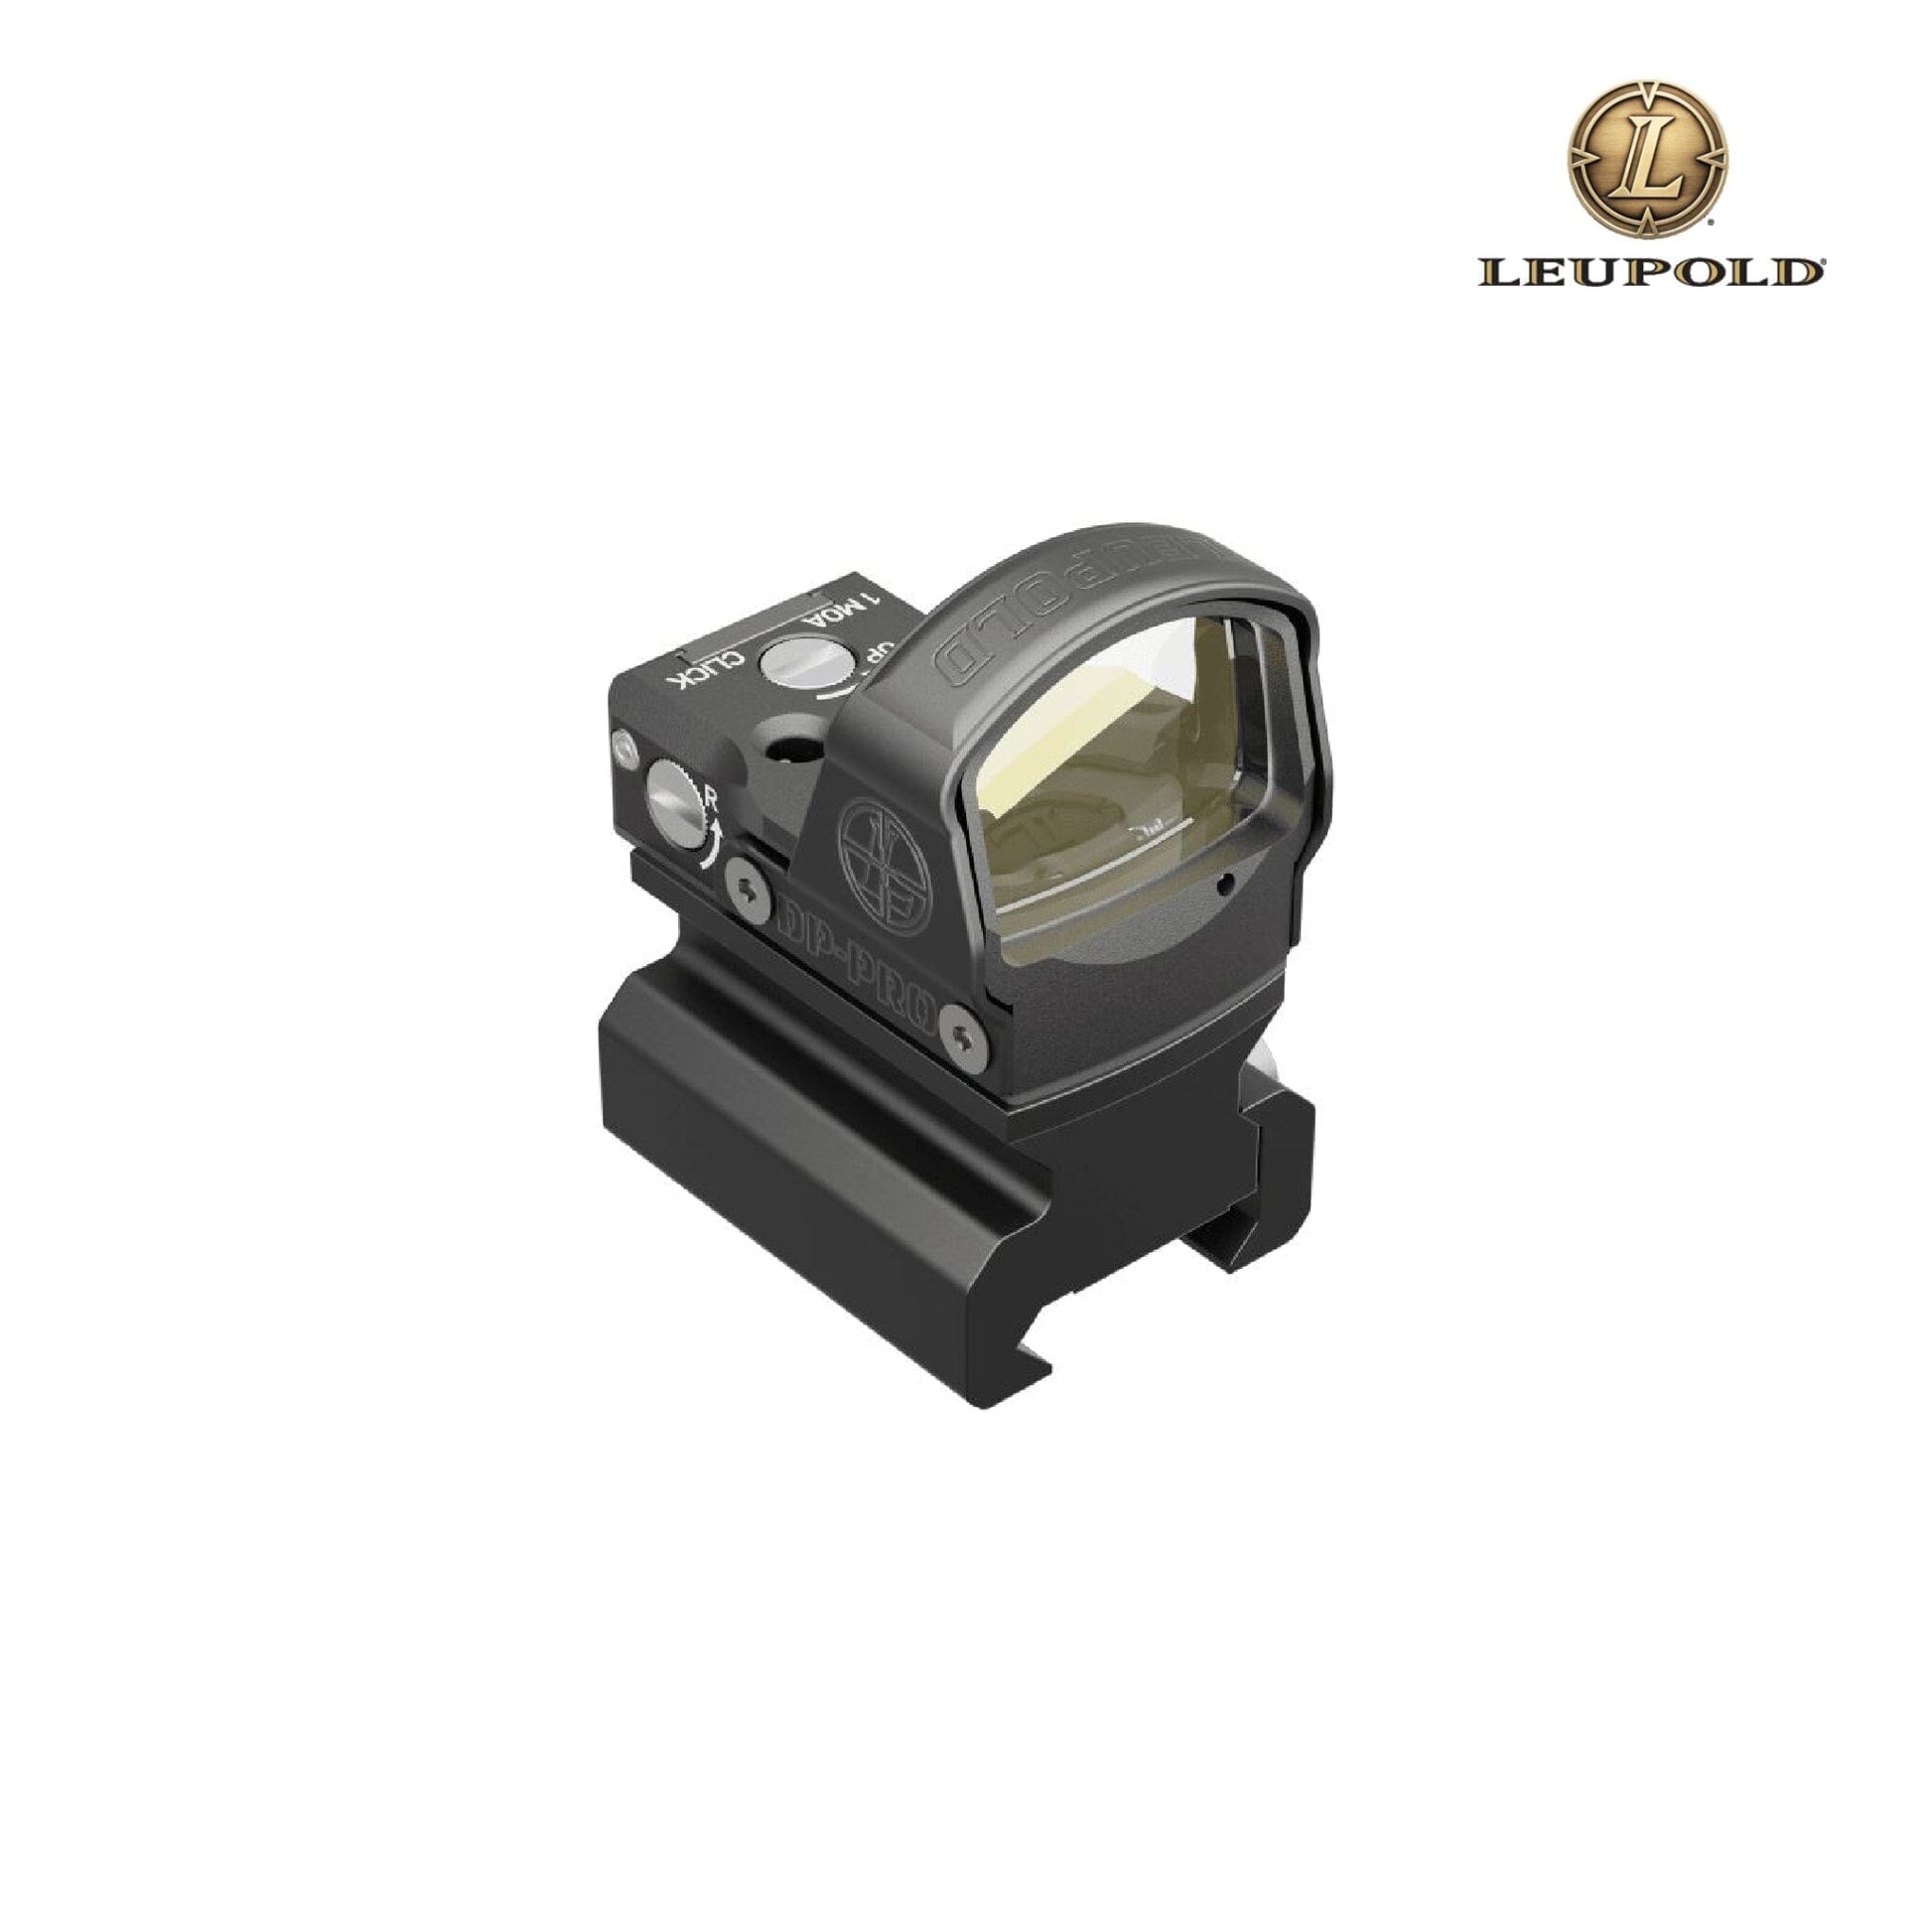 Leupold DeltaPoint PRO Red Dot Sight with AR Mount - 177156 Red Dot Sight Leupold 